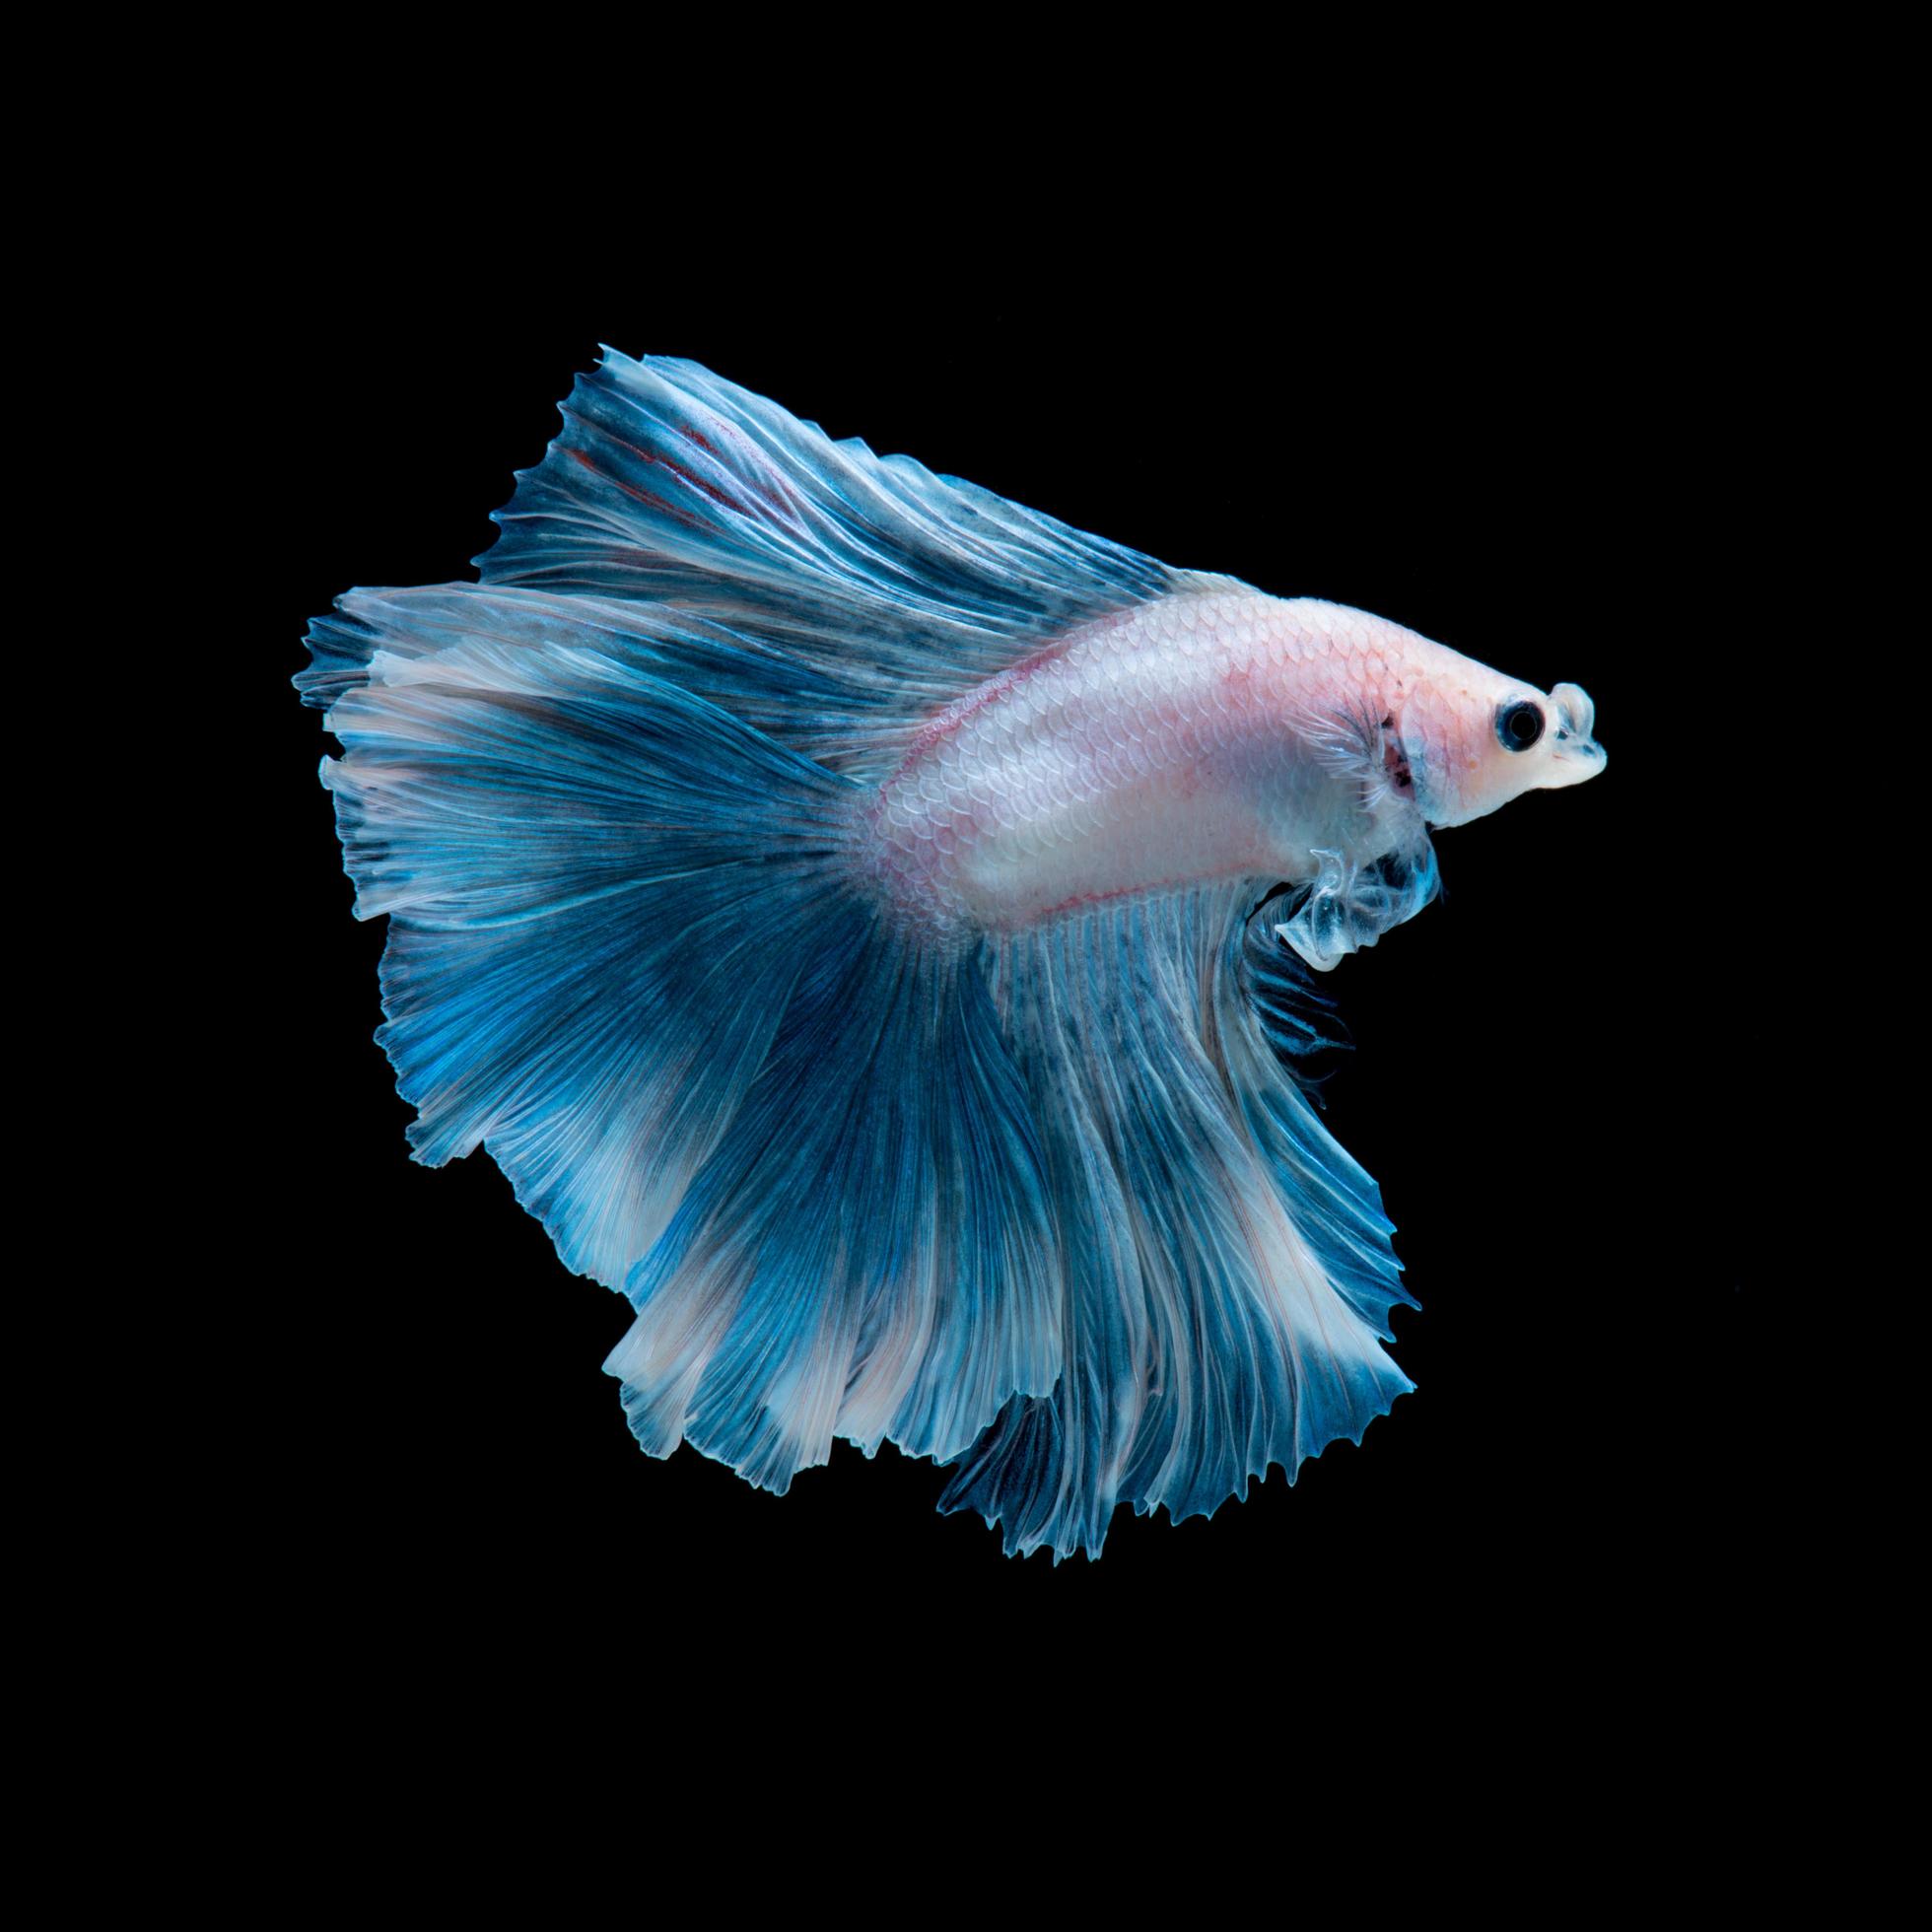 Red Blue Siamese Fighting Fish Fancy Halfmoon Betta the Moving Moment  Beautiful of Betta Fish in Thailand Stock Photo  Image of competition  action 199629110